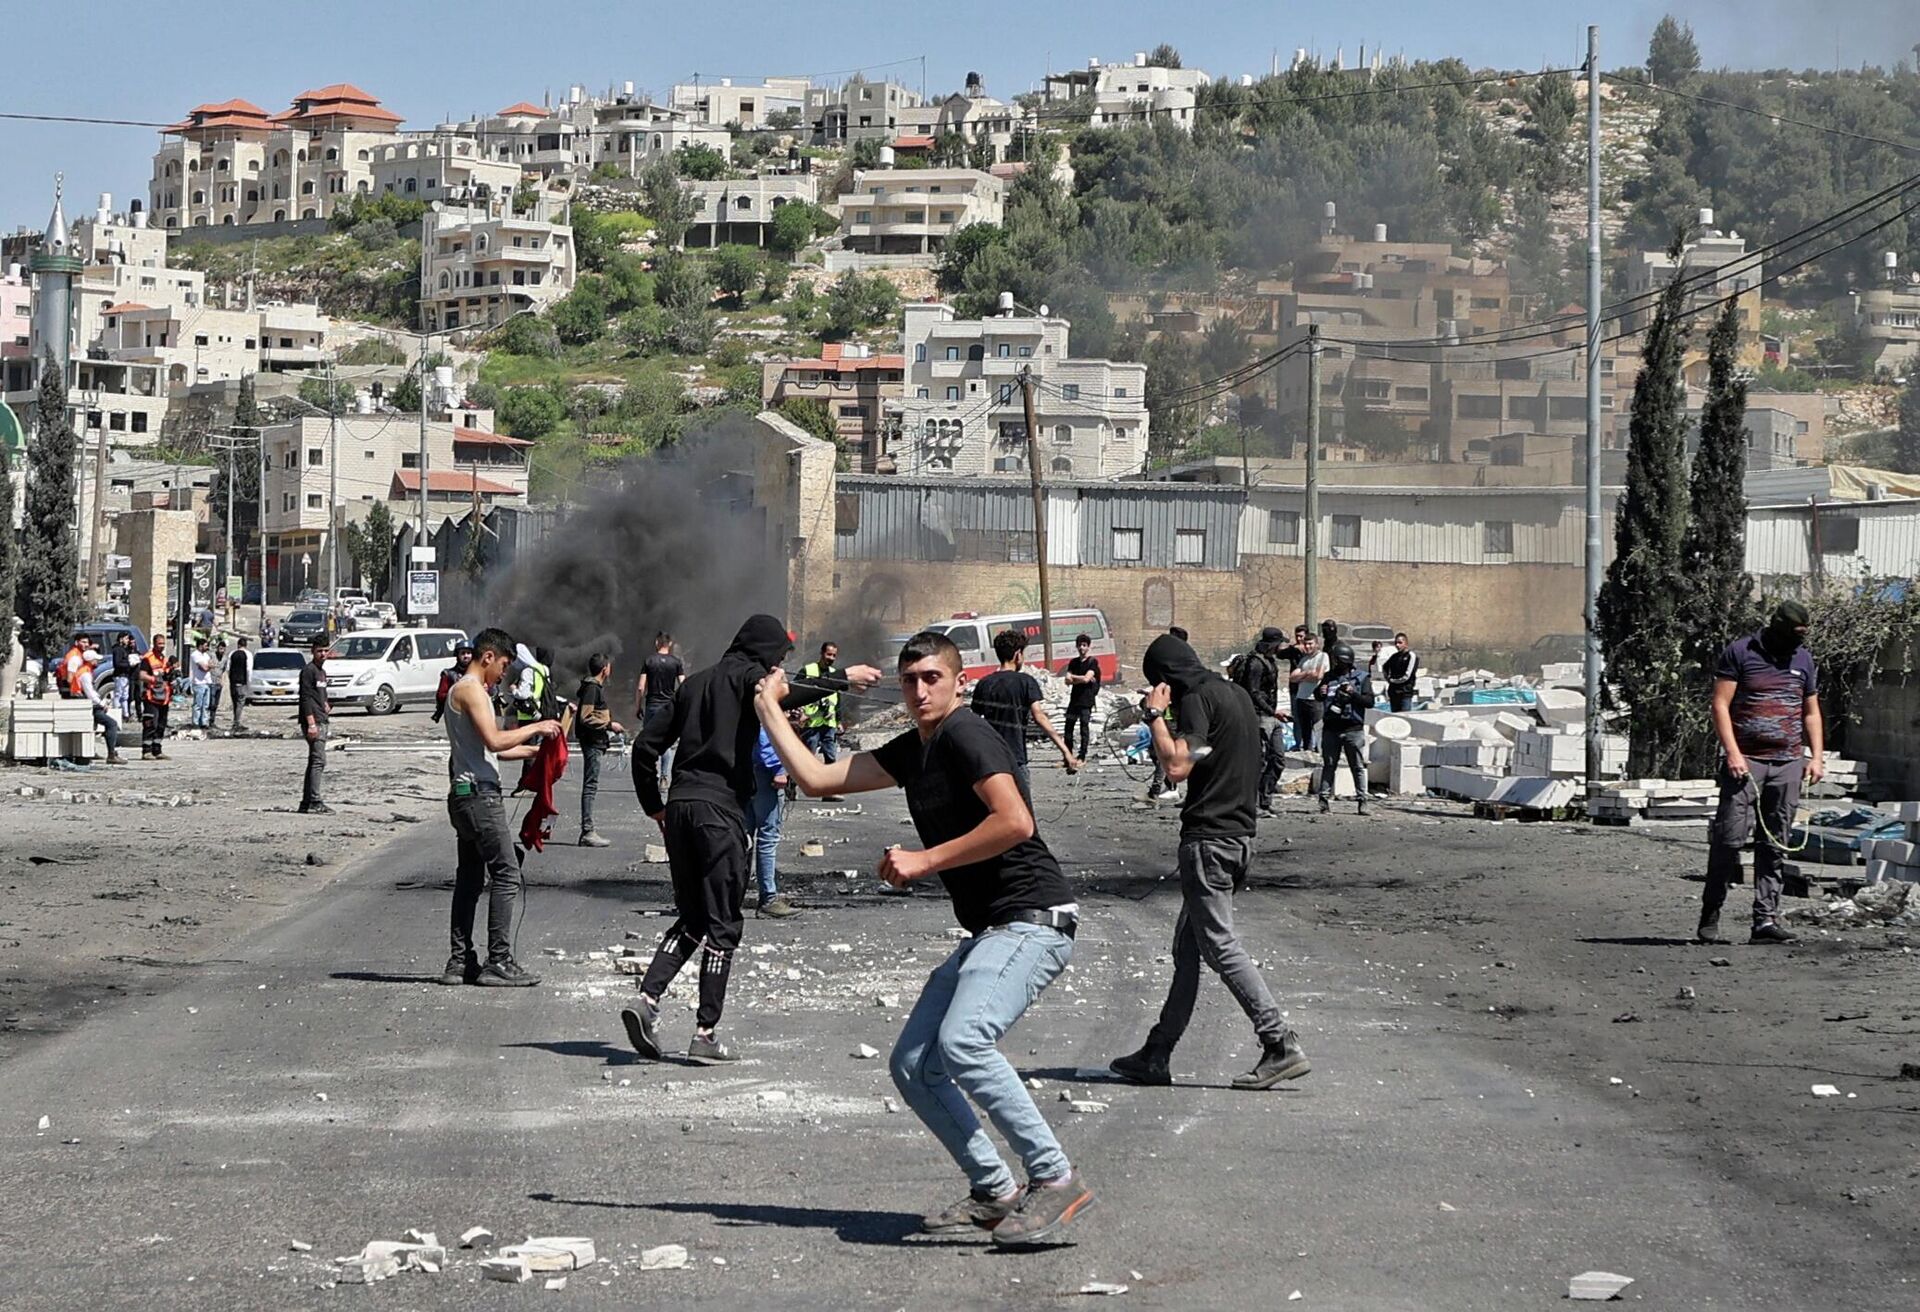 Palestinian protesters hurl rocks at Israeli security amid clashes during a demonstration against Jewish settlements and in support of Jerusalem's Al-Aqsa mosque, on the main street of Beita village in the occupied West Bank, on April 15, 2022. - Sputnik International, 1920, 22.04.2022